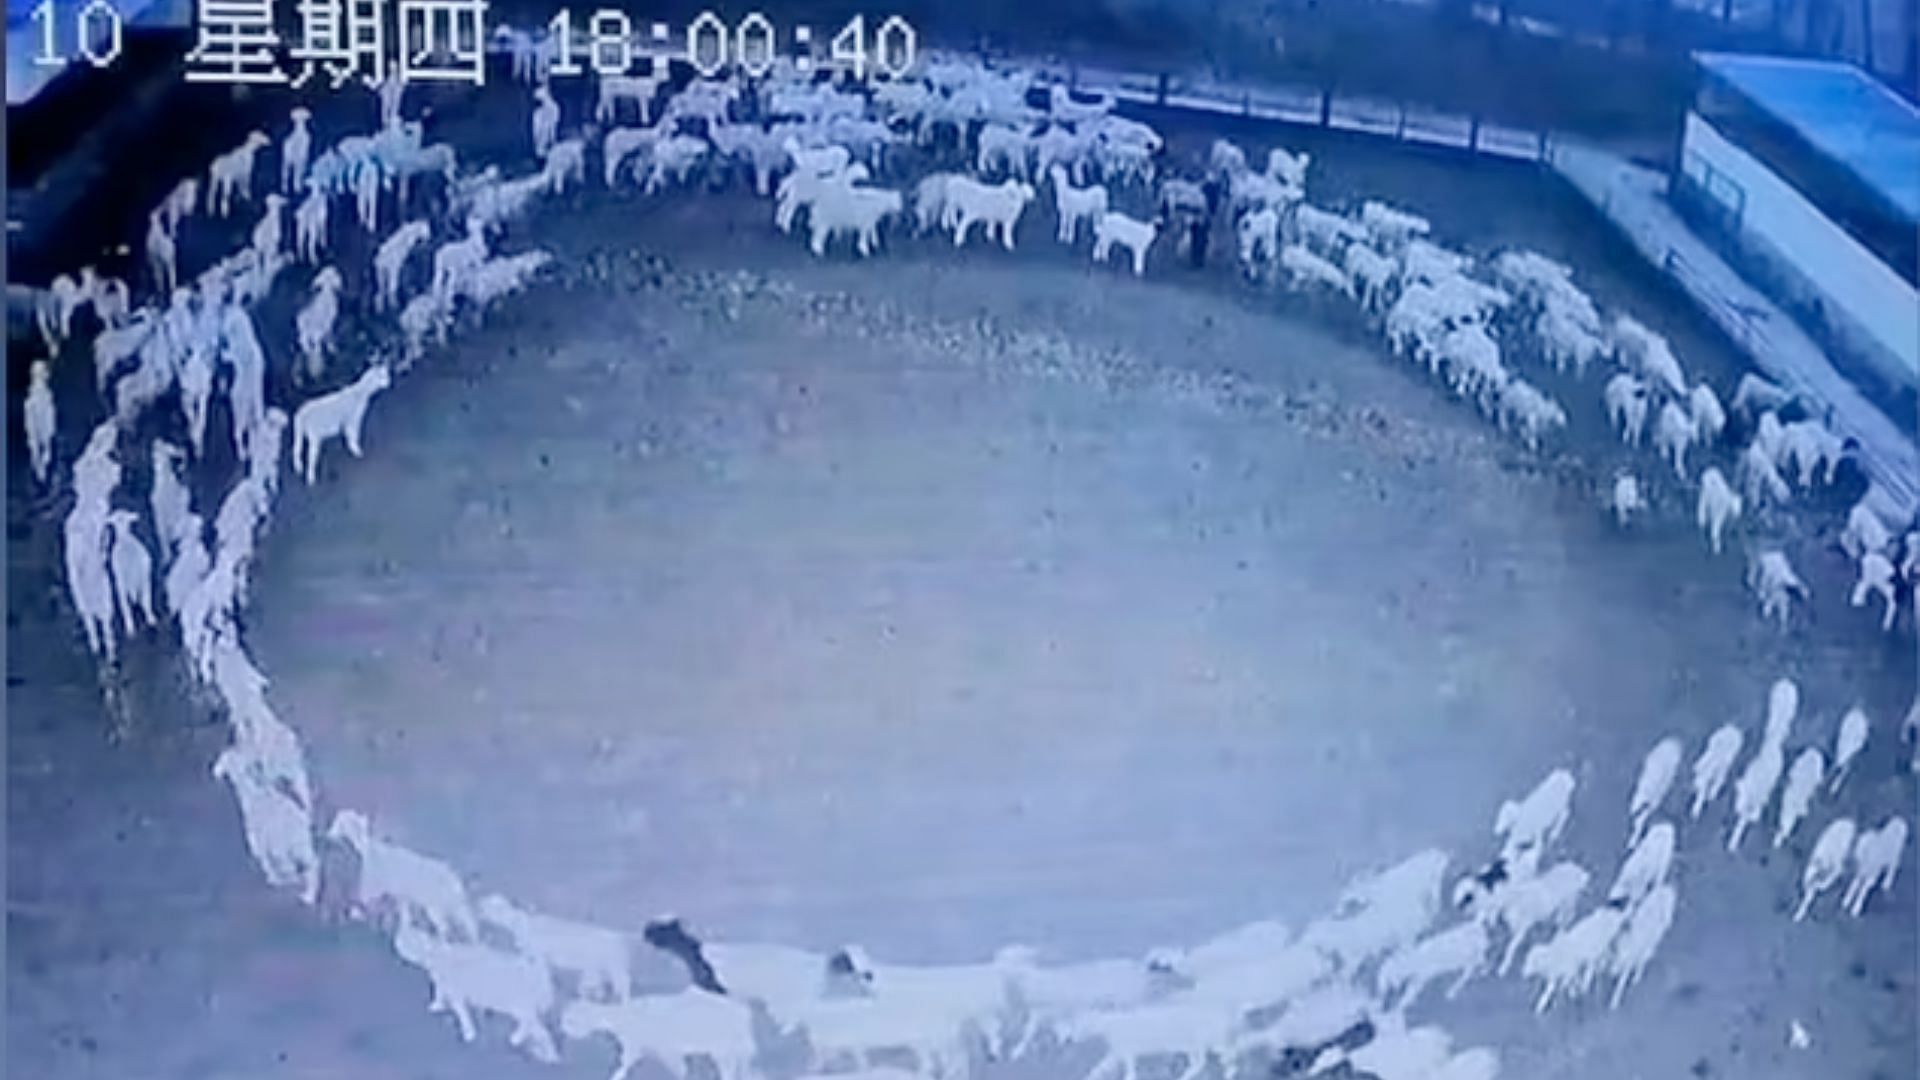 Sheep have been walking in a circle for 12 days straight (image via Reddit)